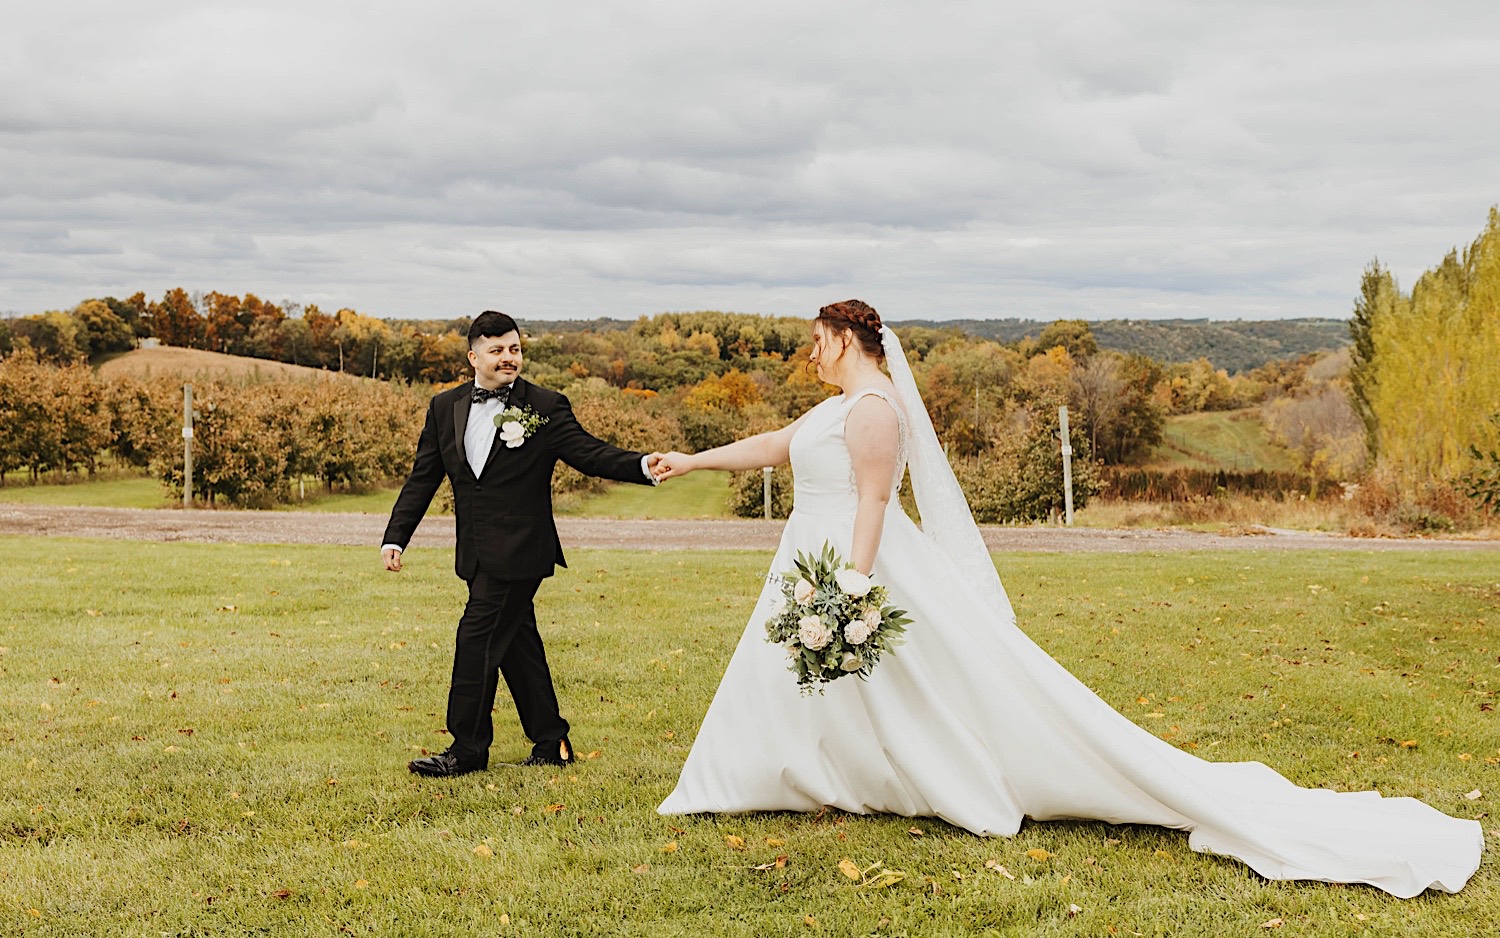 A bride and groom hold hands while walking through a field together on a cloudy day